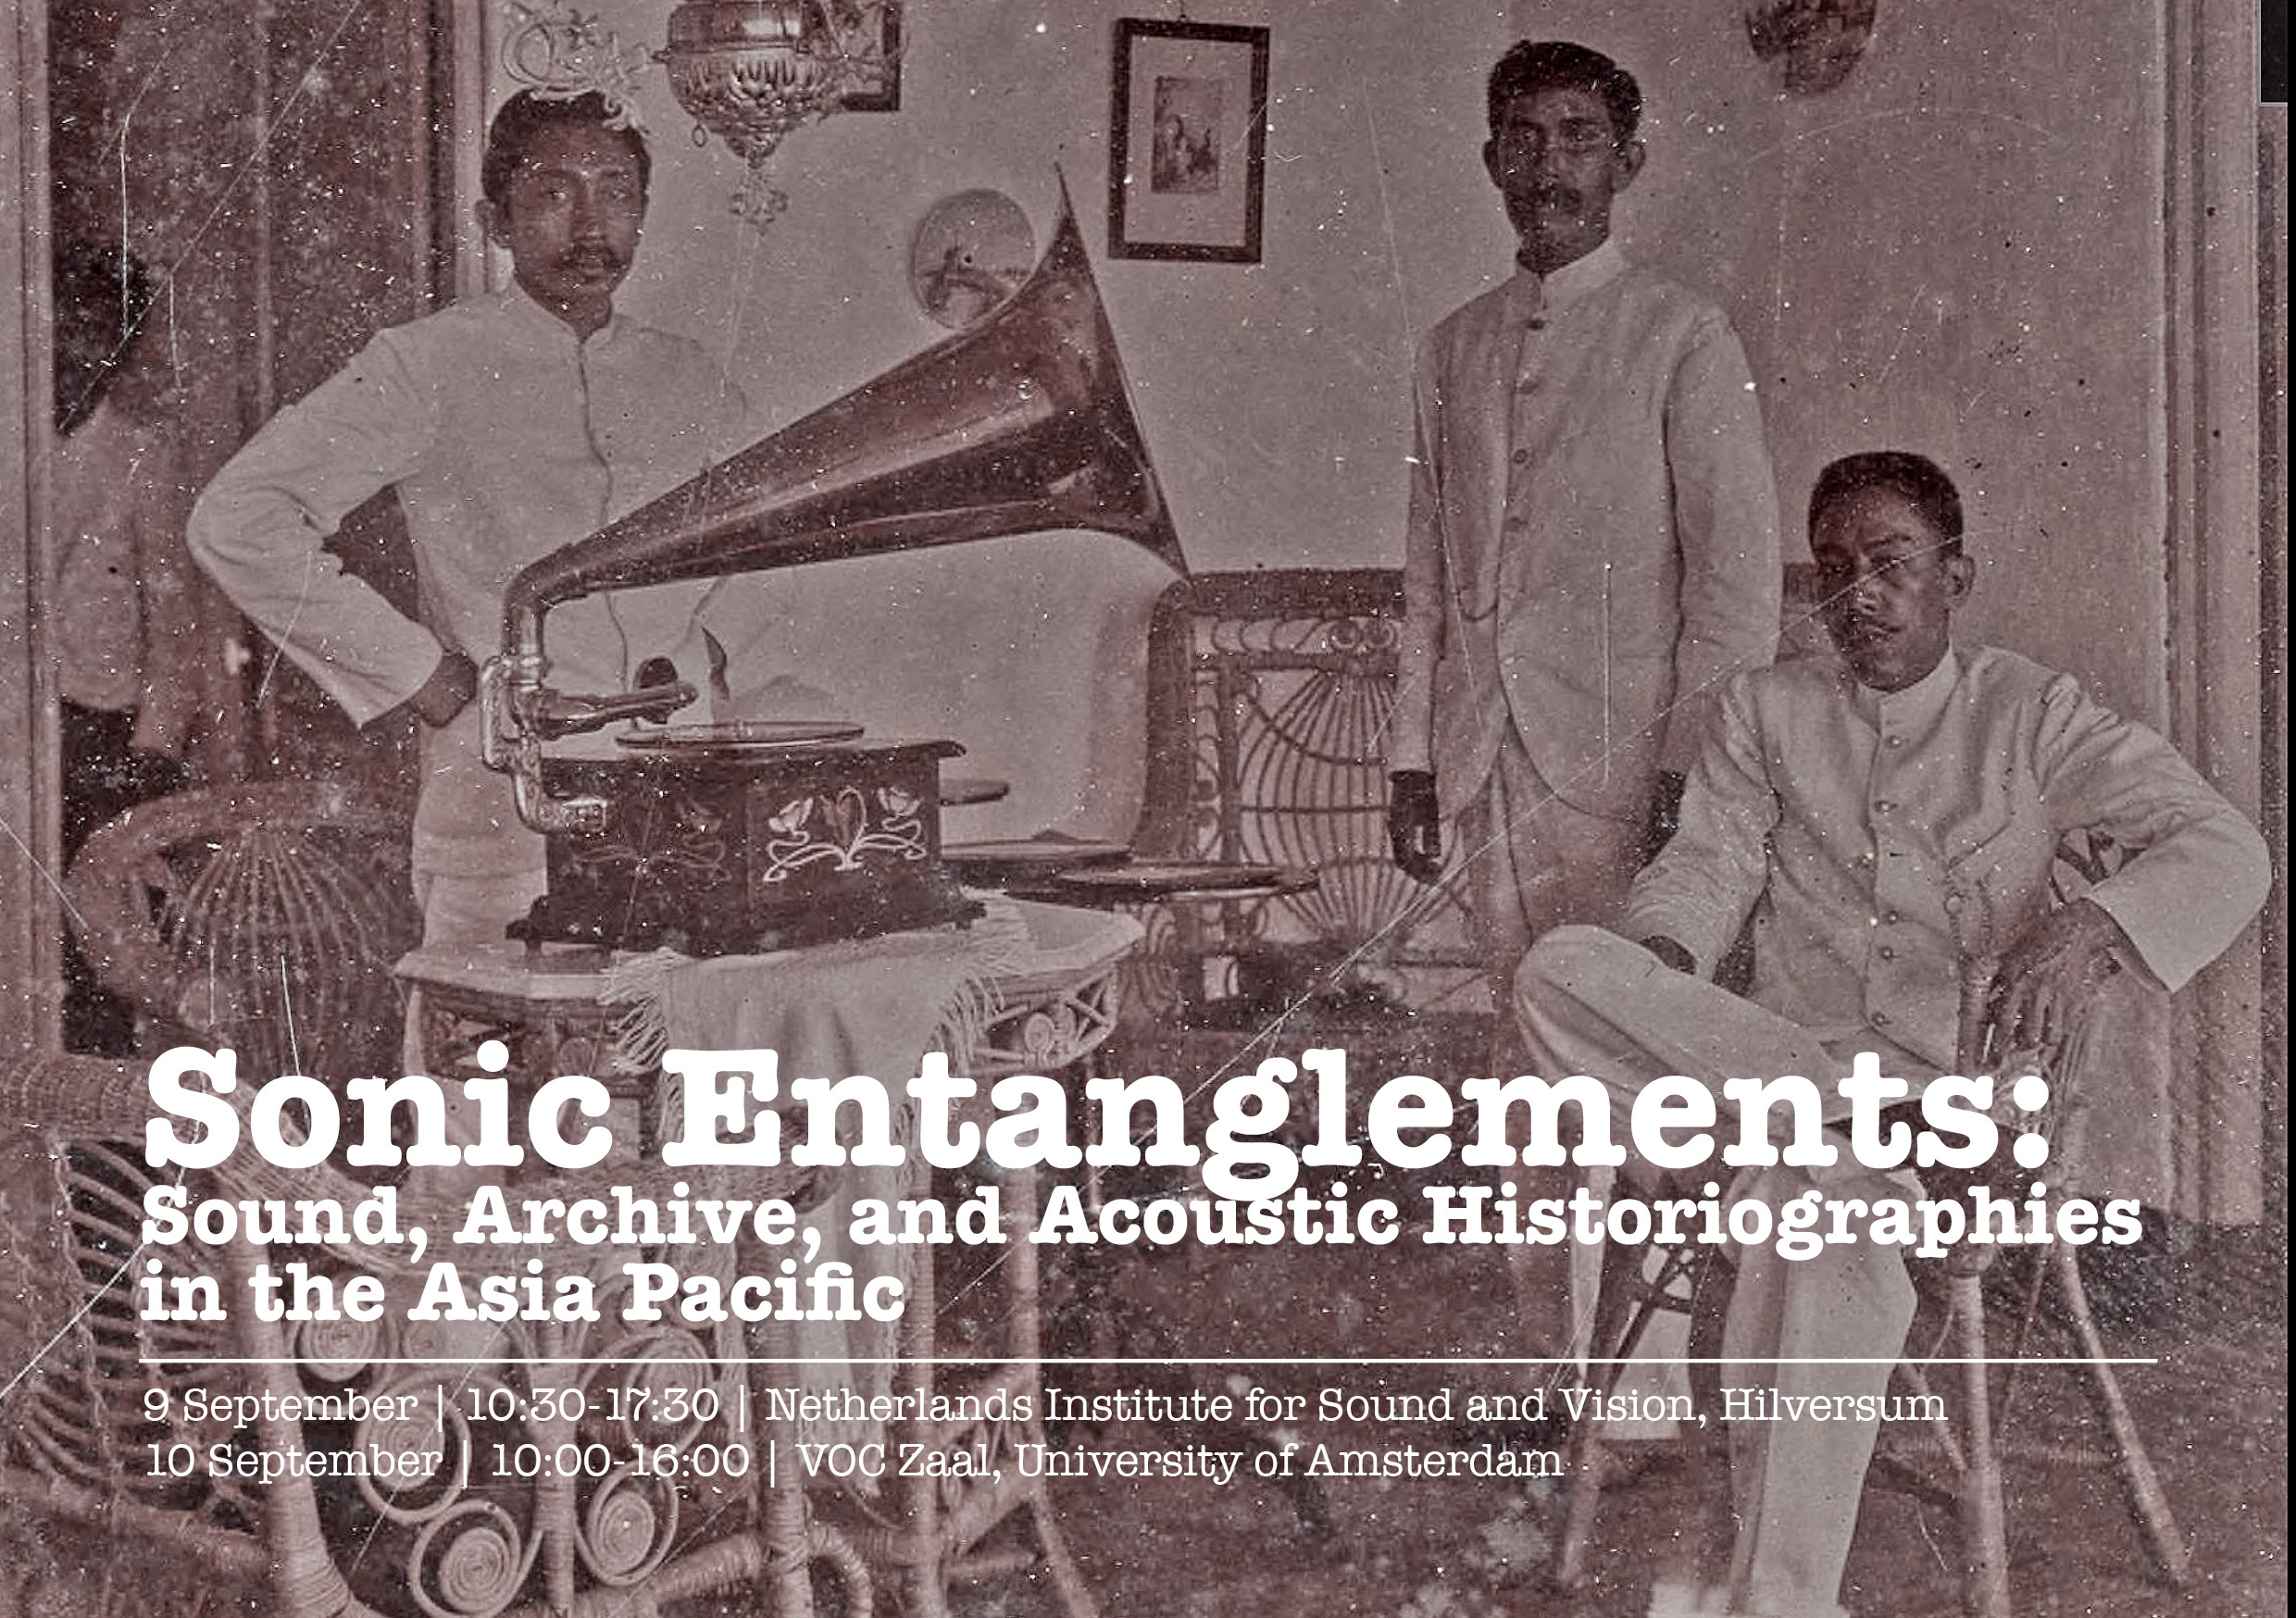 Sonic Entanglements: Sound, Archive, and Acoustic Historiographies in the Asia Pacific